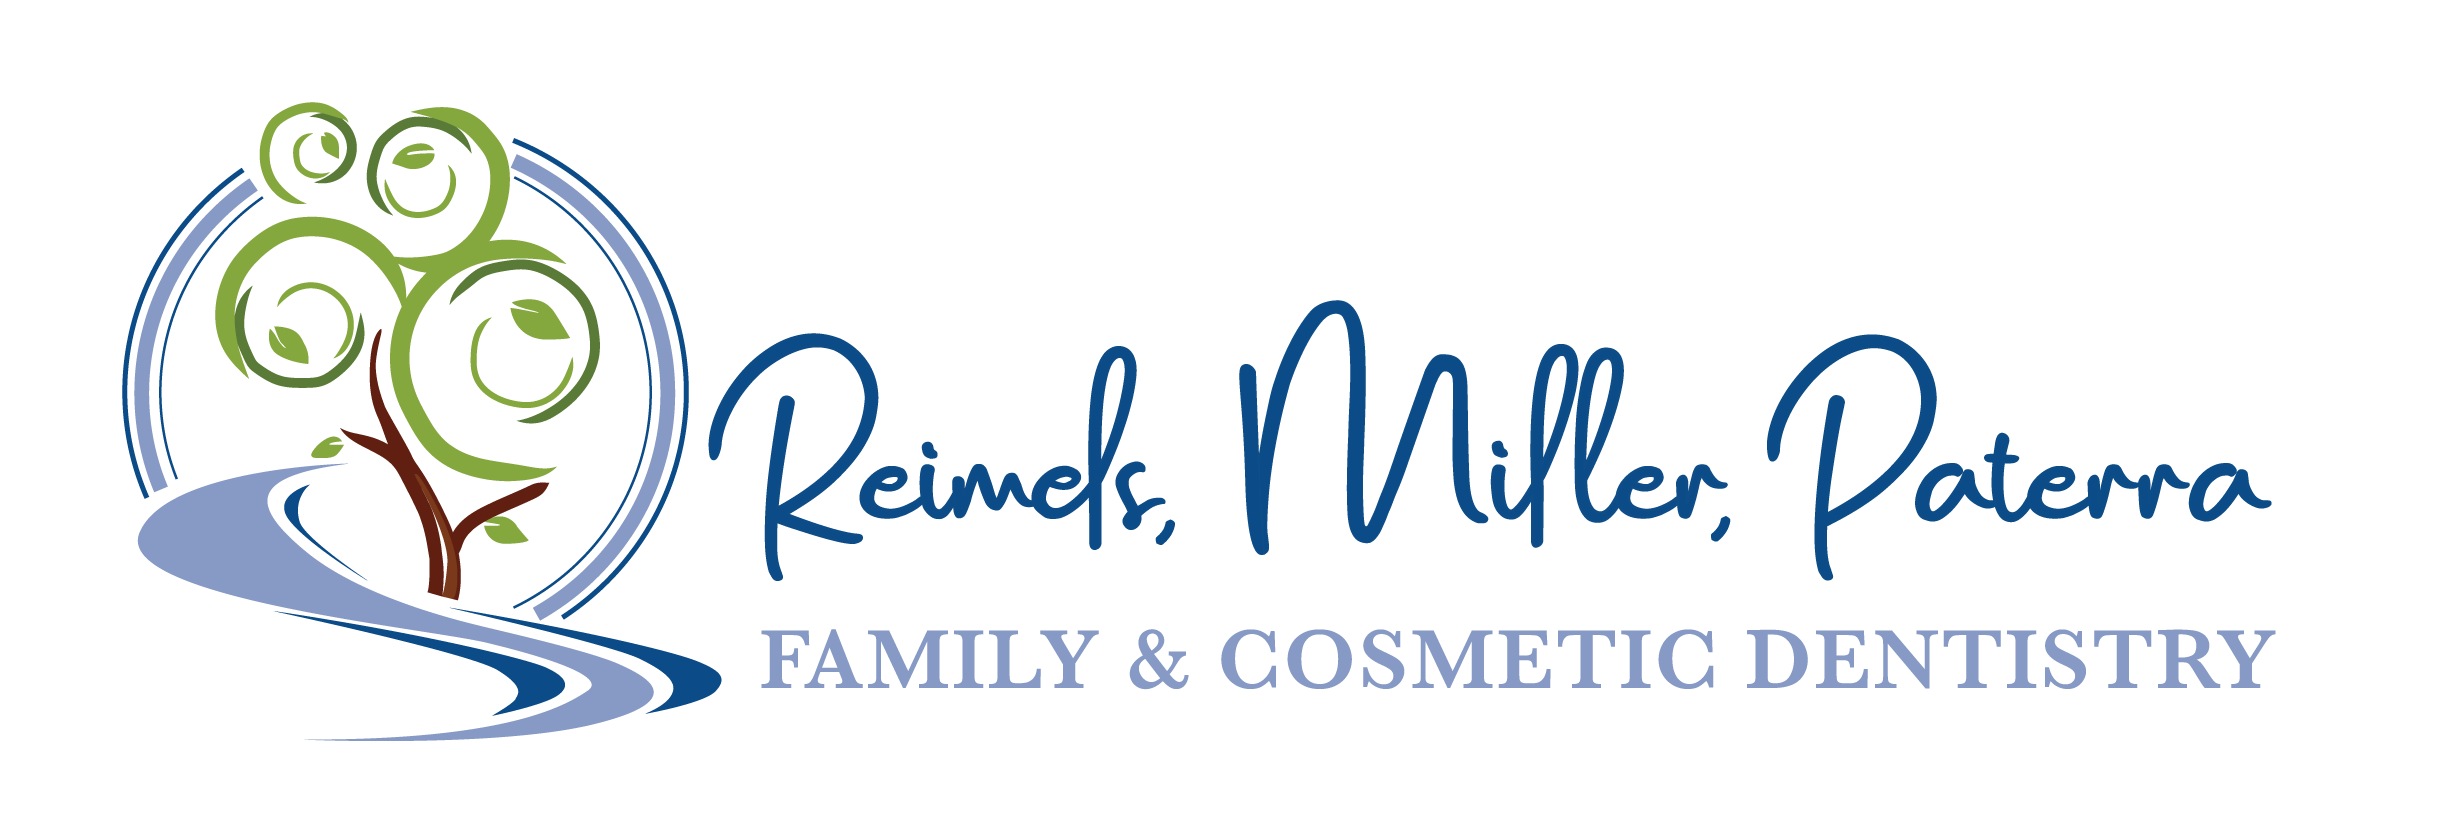 Reimels, Miller and Paterra Family and Cosmetic Dentistry logo